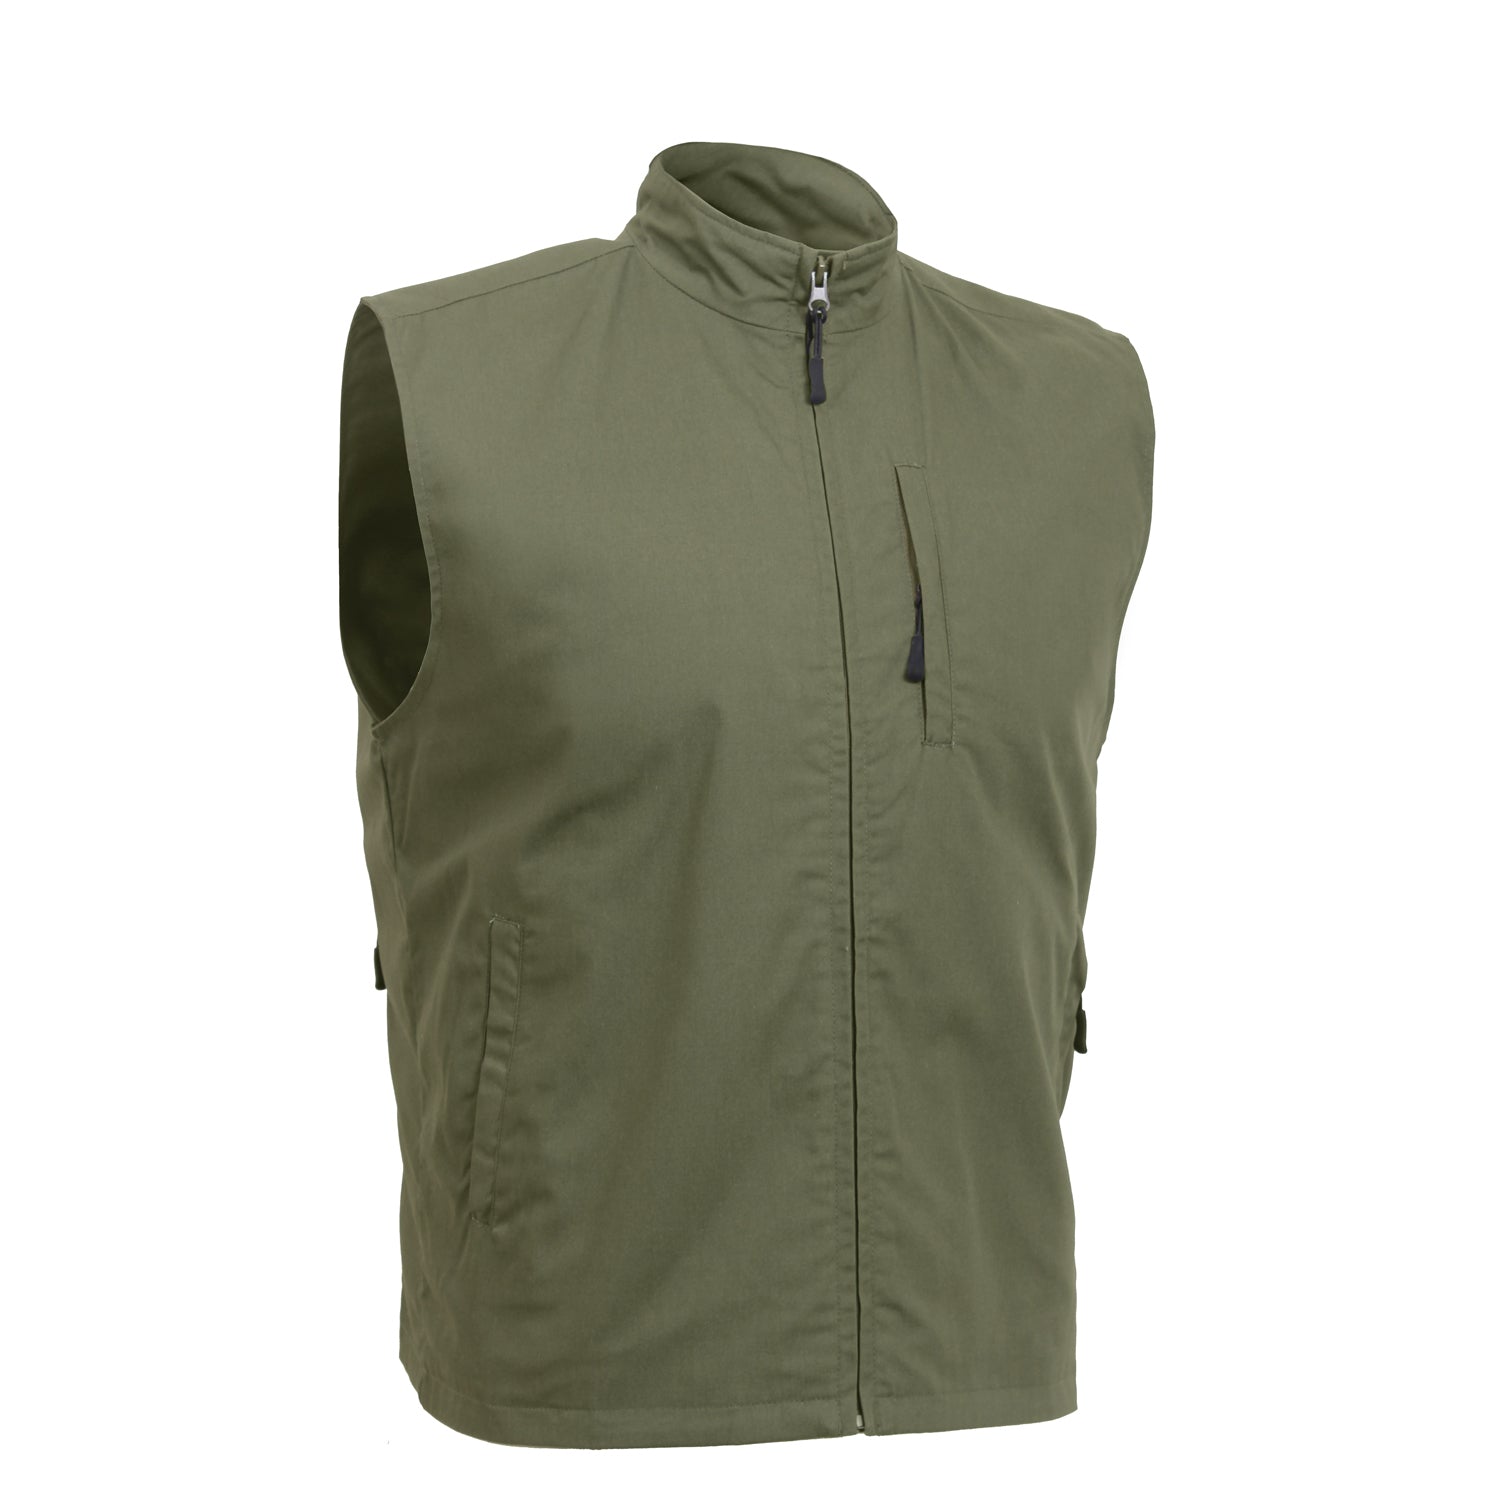 Olive Drab - Tactical Undercover Travel Vest